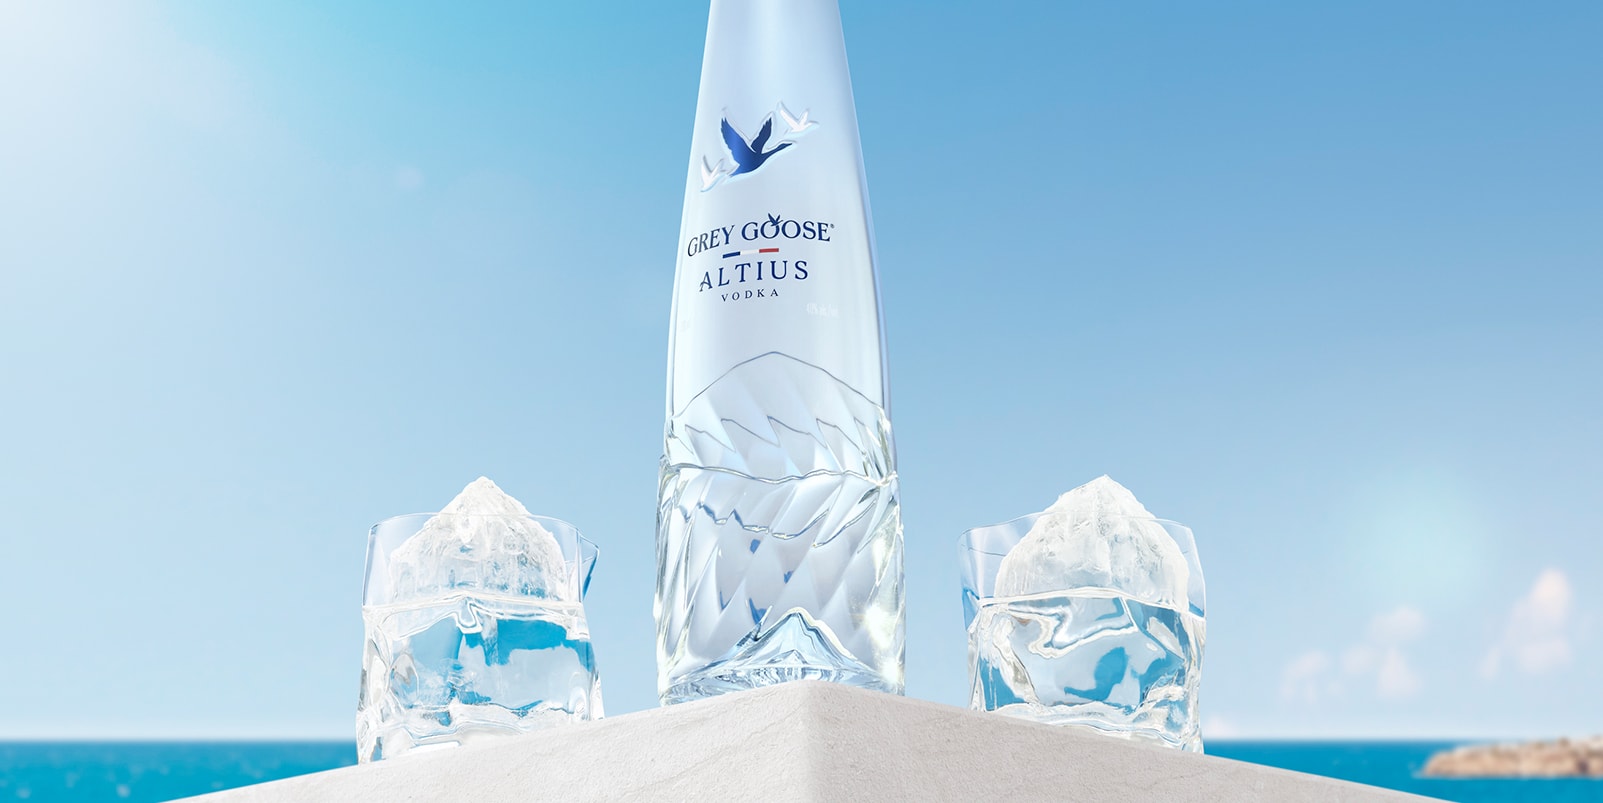 Does GREY GOOSE® Altius taste different from GREY GOOSE® Vodka?